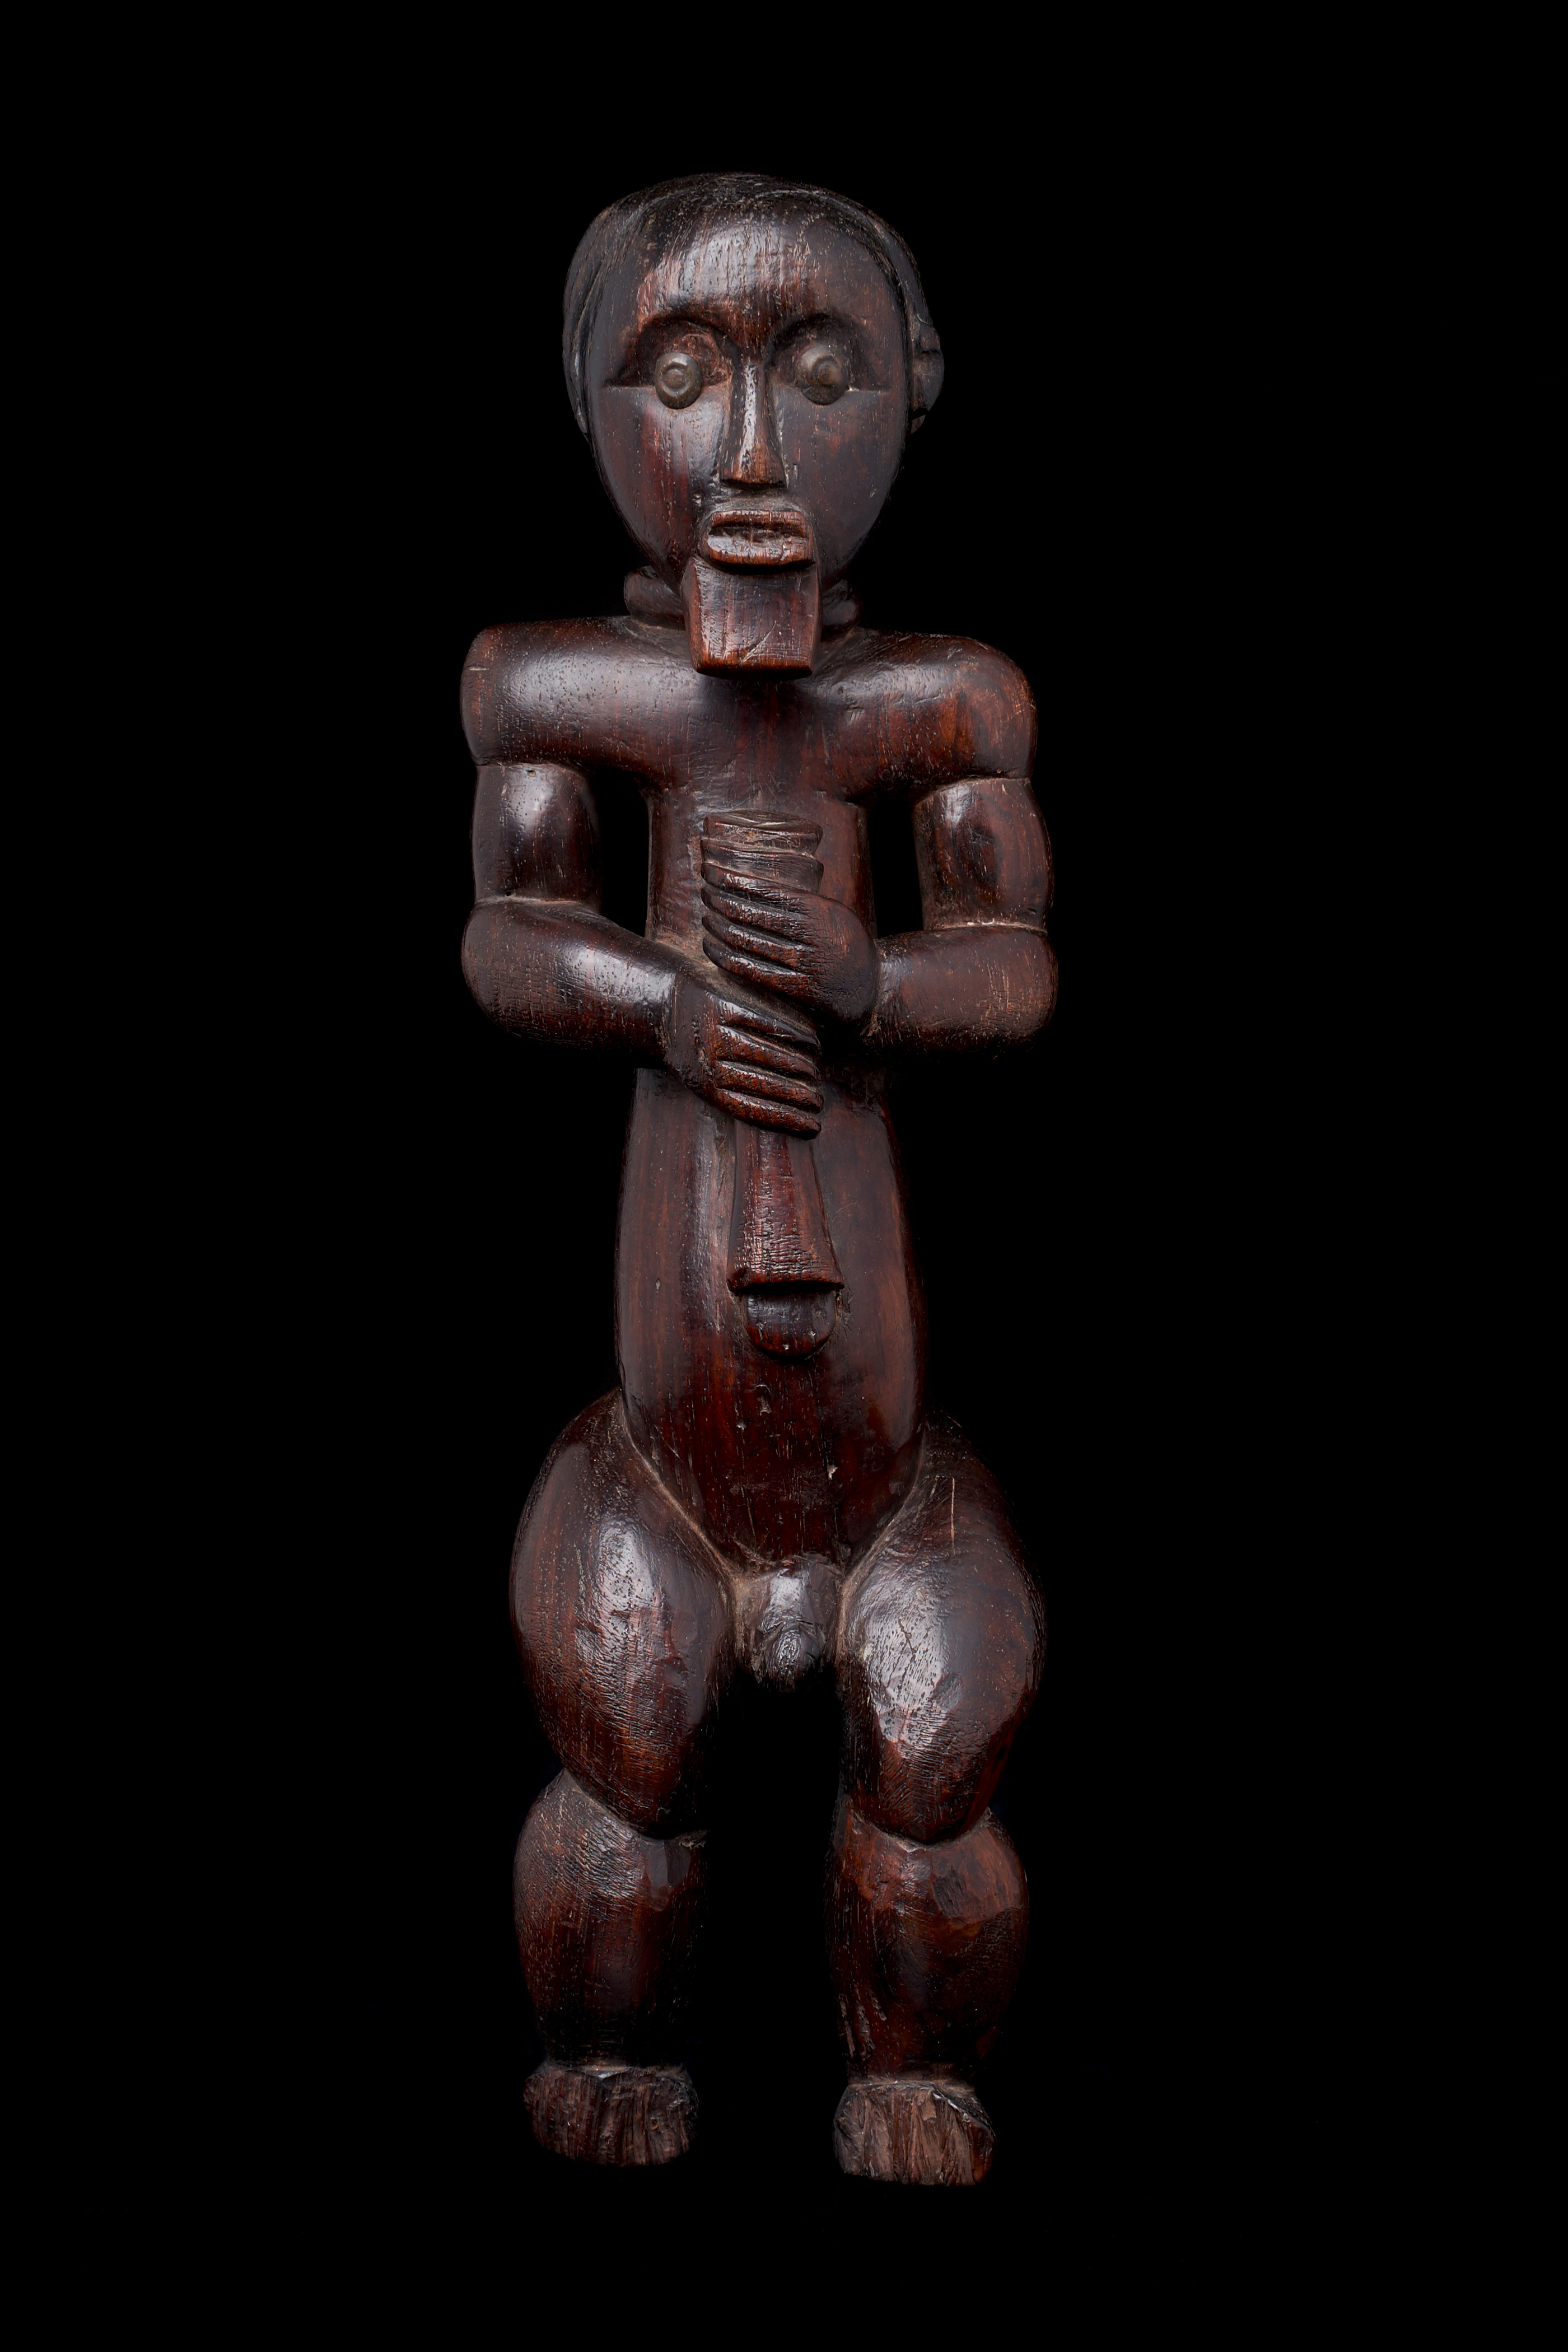 Rare and Important Reliquary guardian figure - ‘Byeri’ - Fang People, Gabon M31 - (Please call for price).